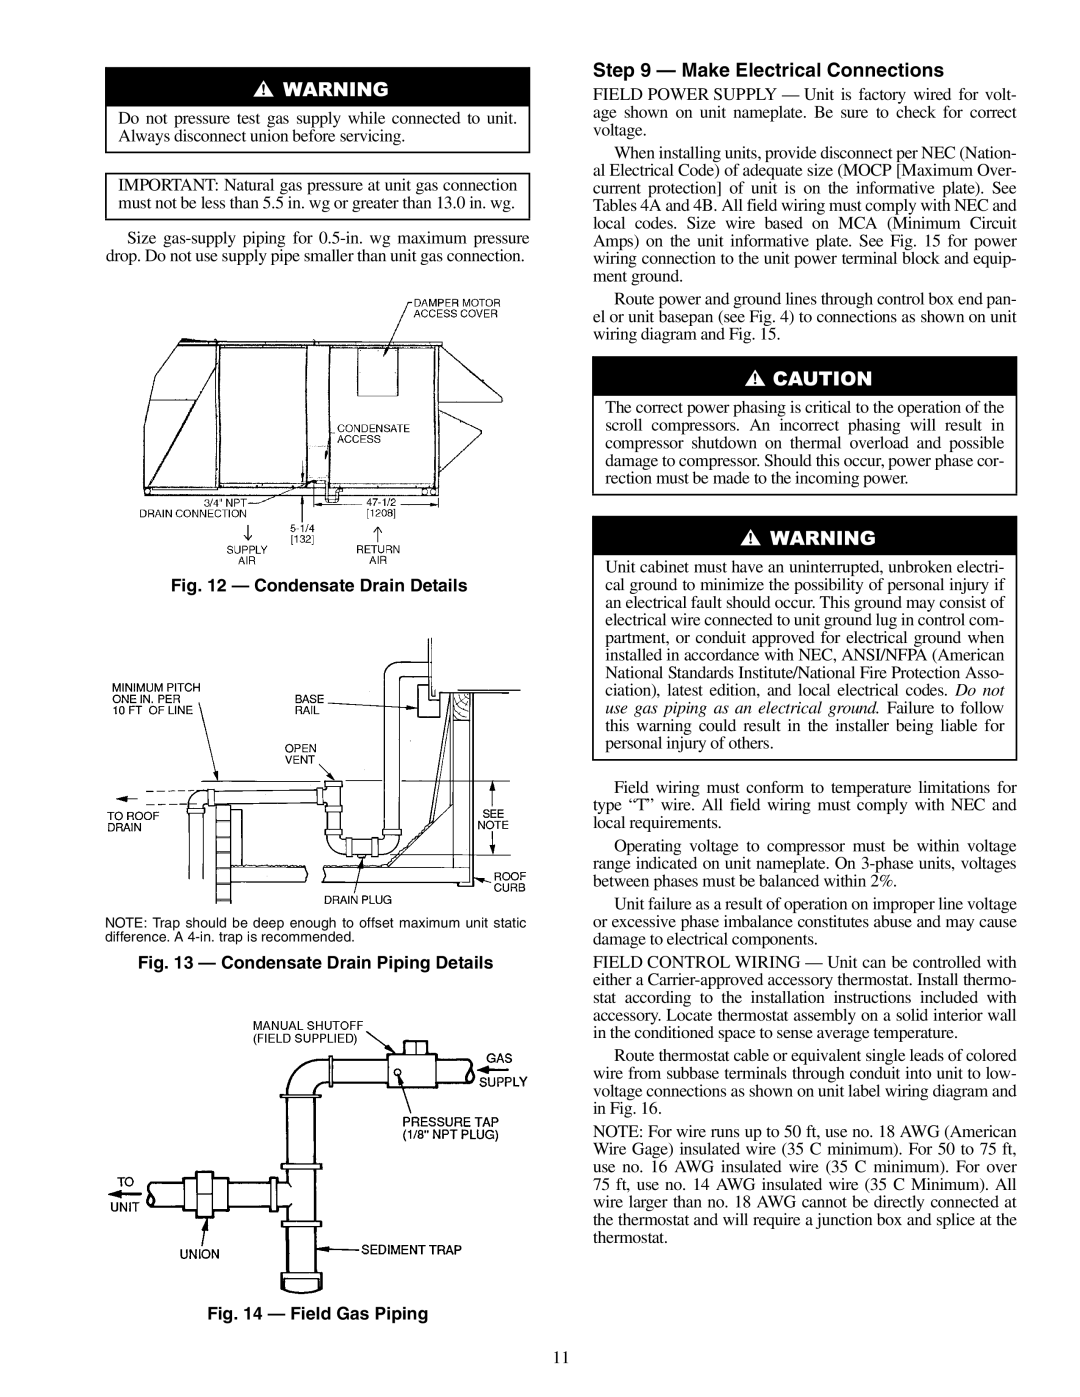 Carrier 48PG20-28 Make Electrical Connections, Condensate Drain Details, Condensate Drain Piping Details, Field Gas Piping 